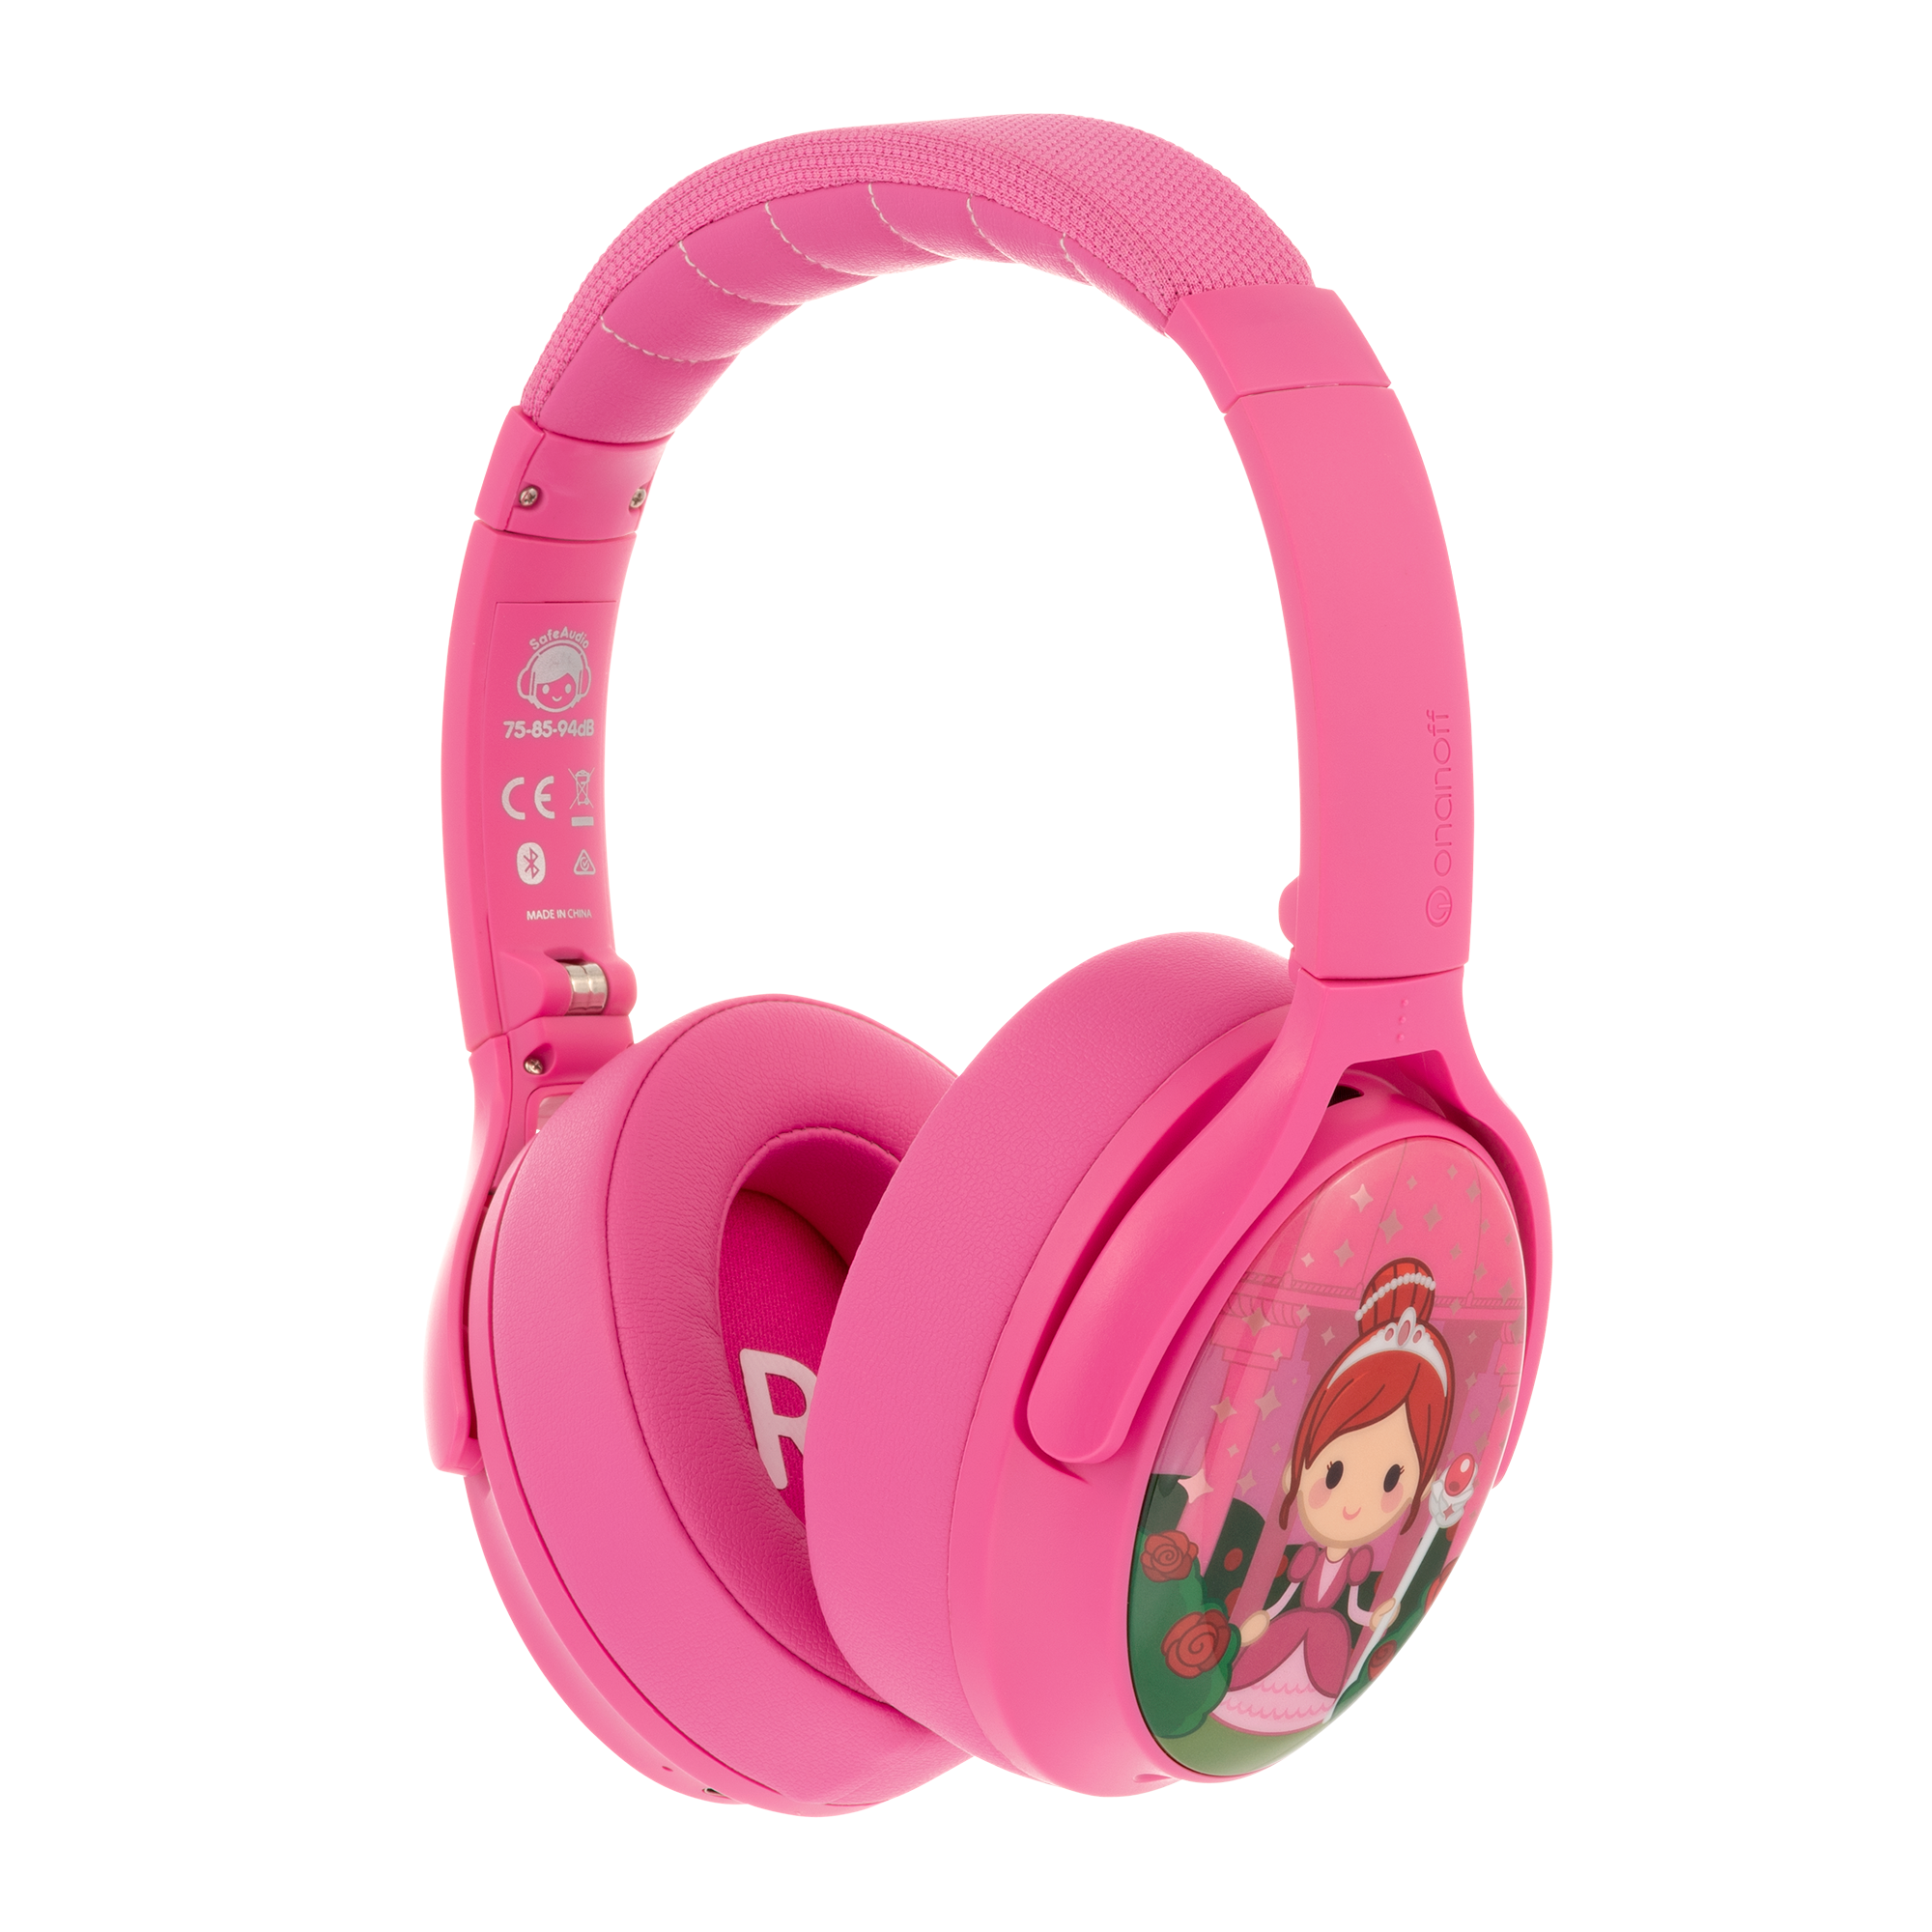 Cosmos Plus, over-ear hph BT, ANC, rose pink